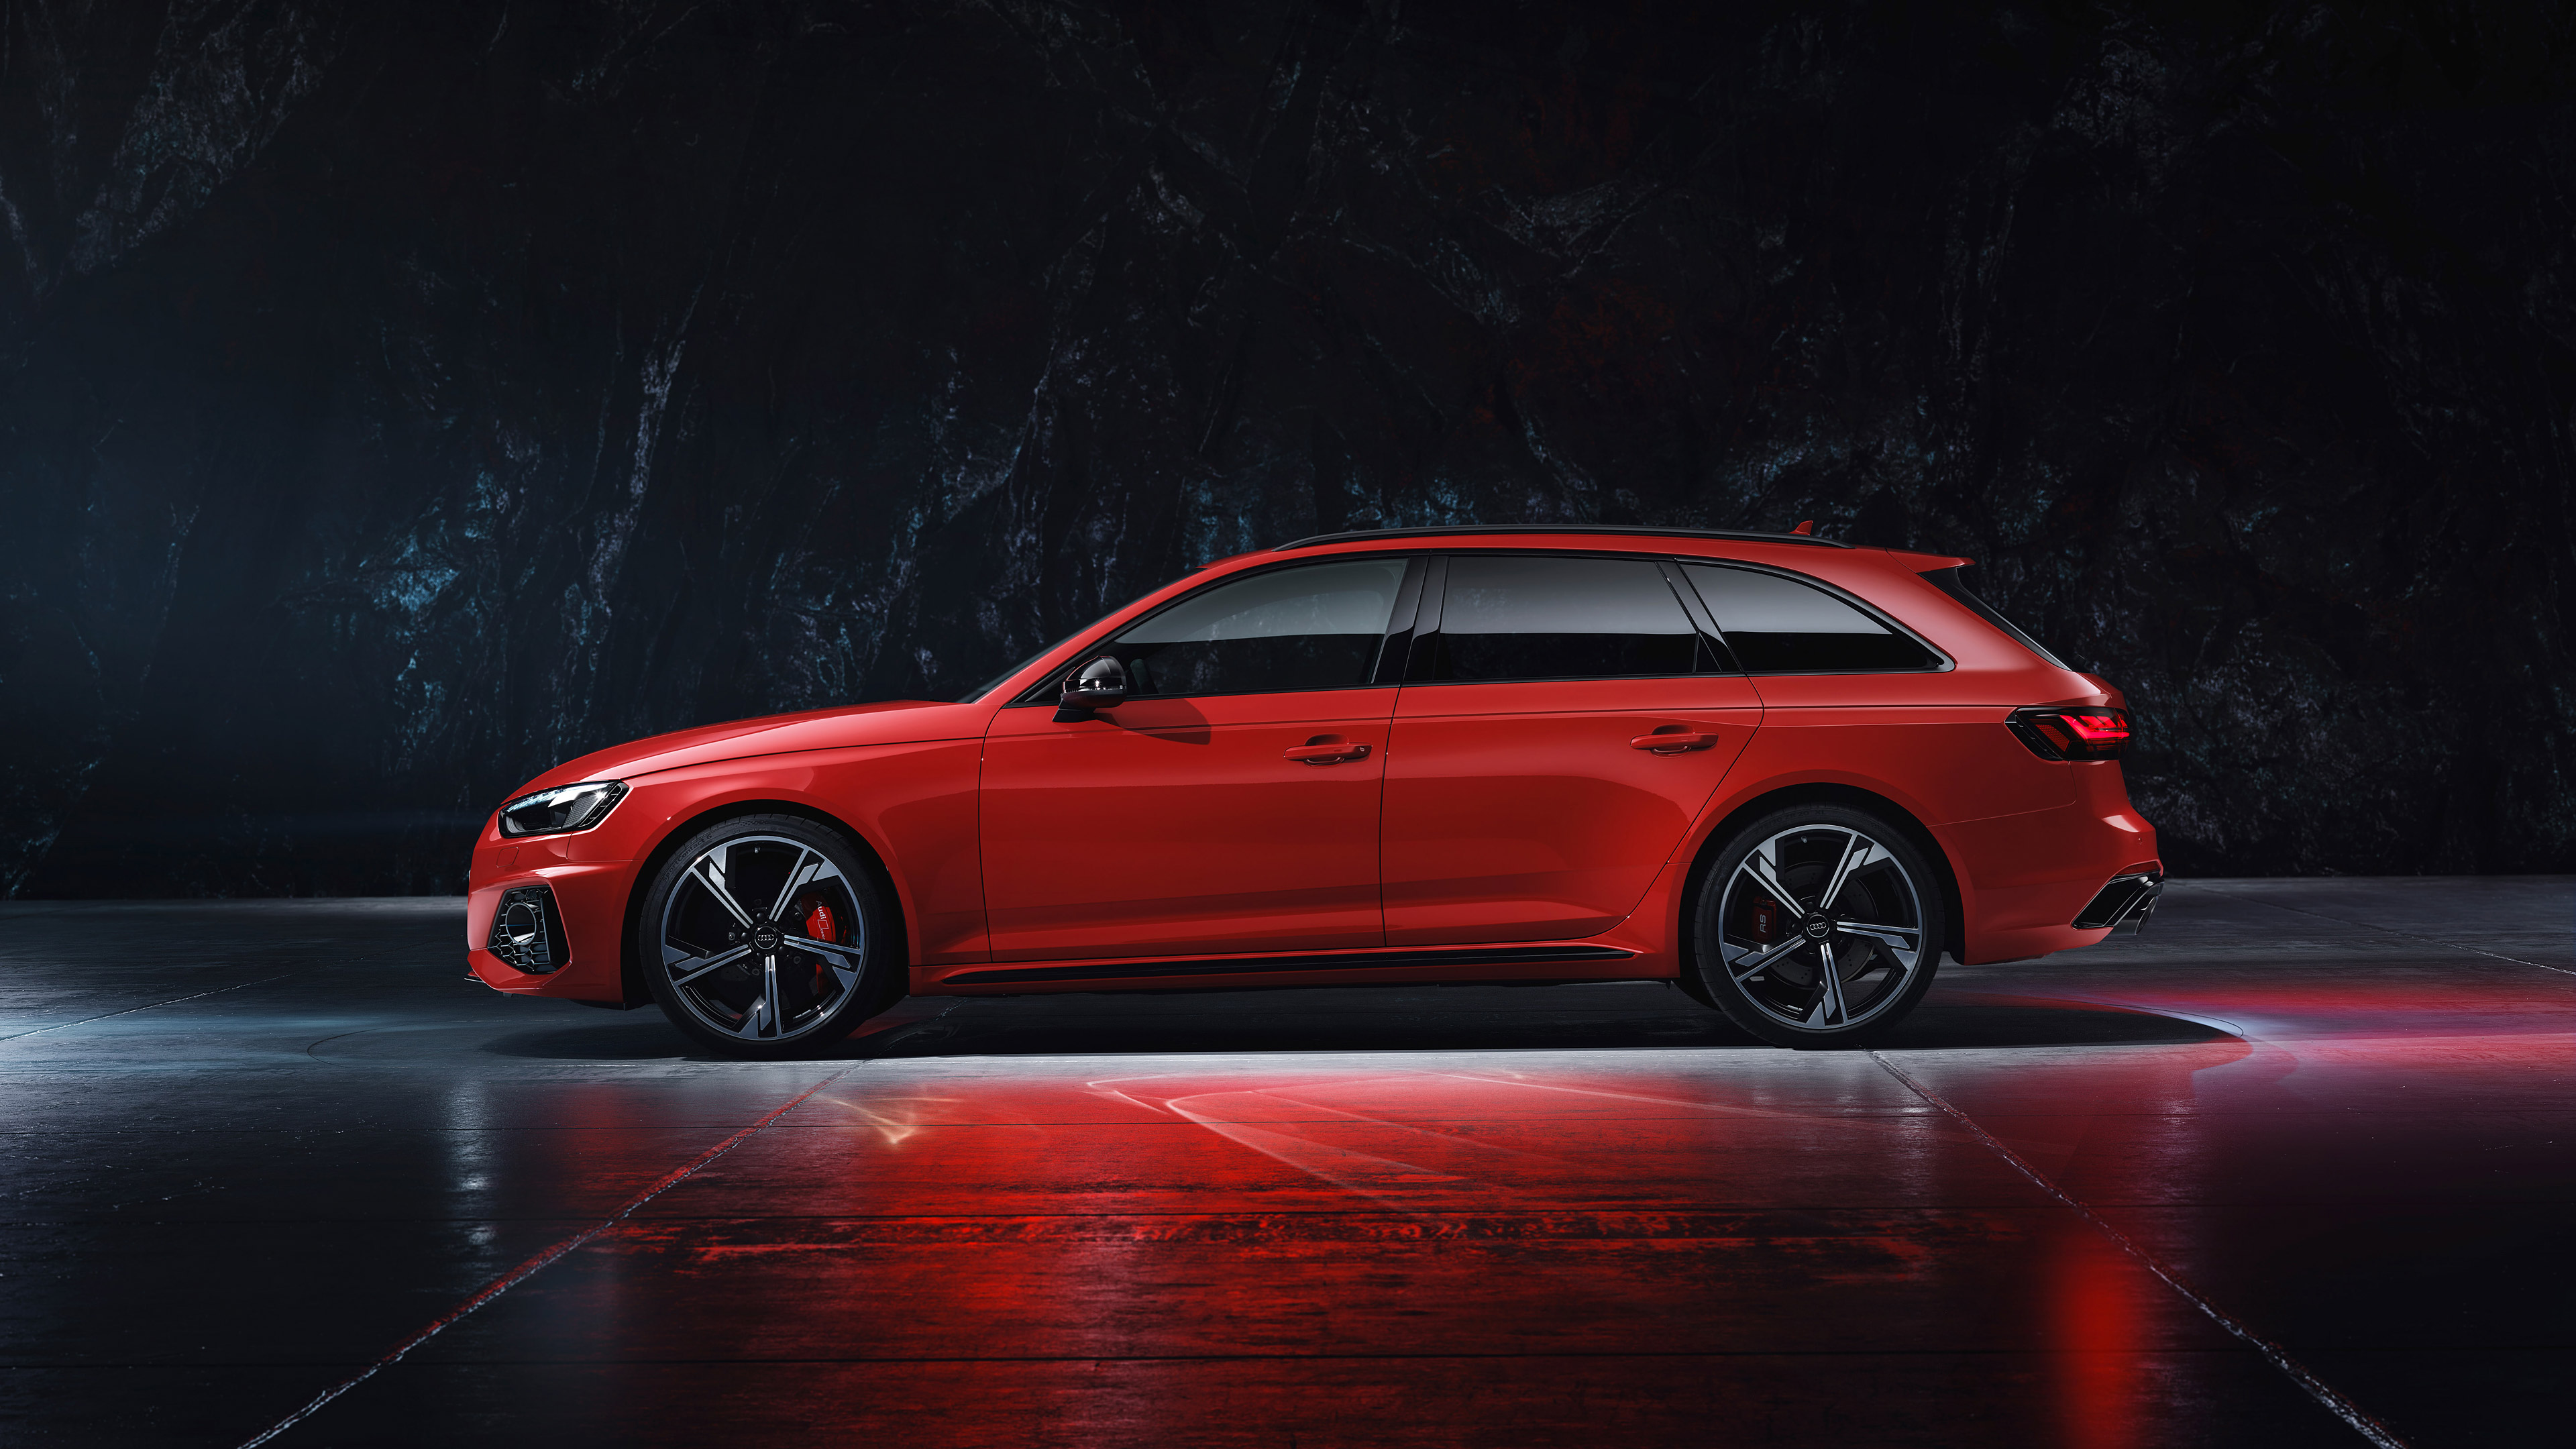 General 3840x2160 Audi RS4 Avant Audi RS4 car vehicle spotlights red cars station wagon German cars Volkswagen Group